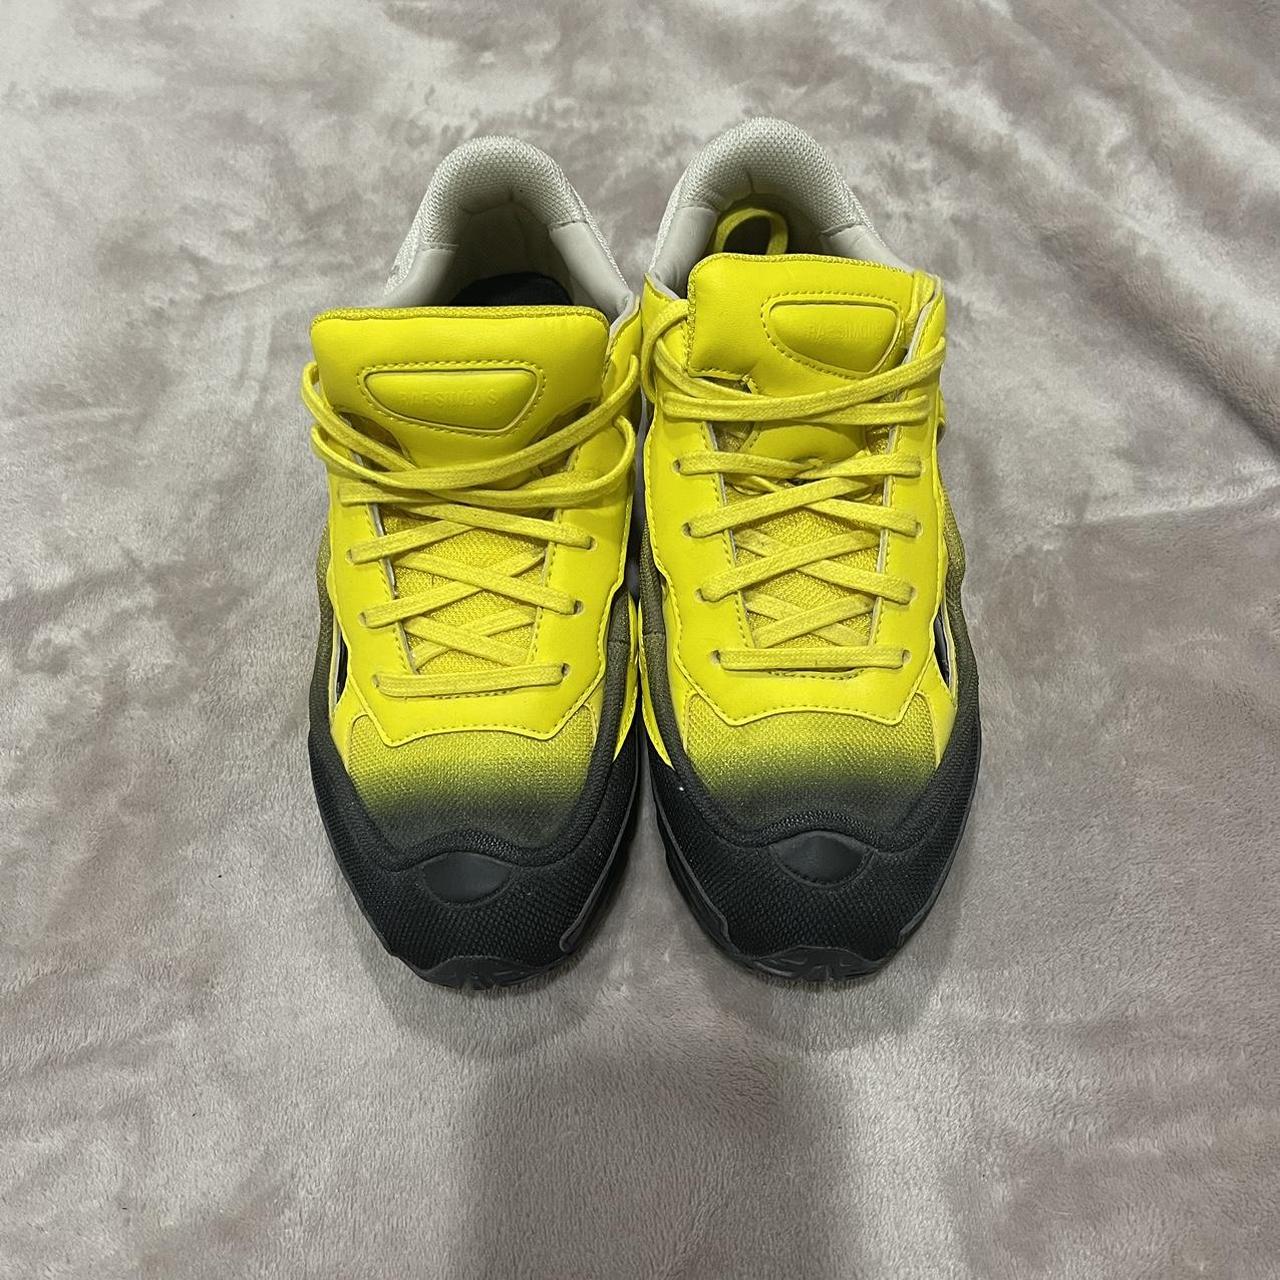 Raf Simons Men's Yellow and Black Trainers (2)